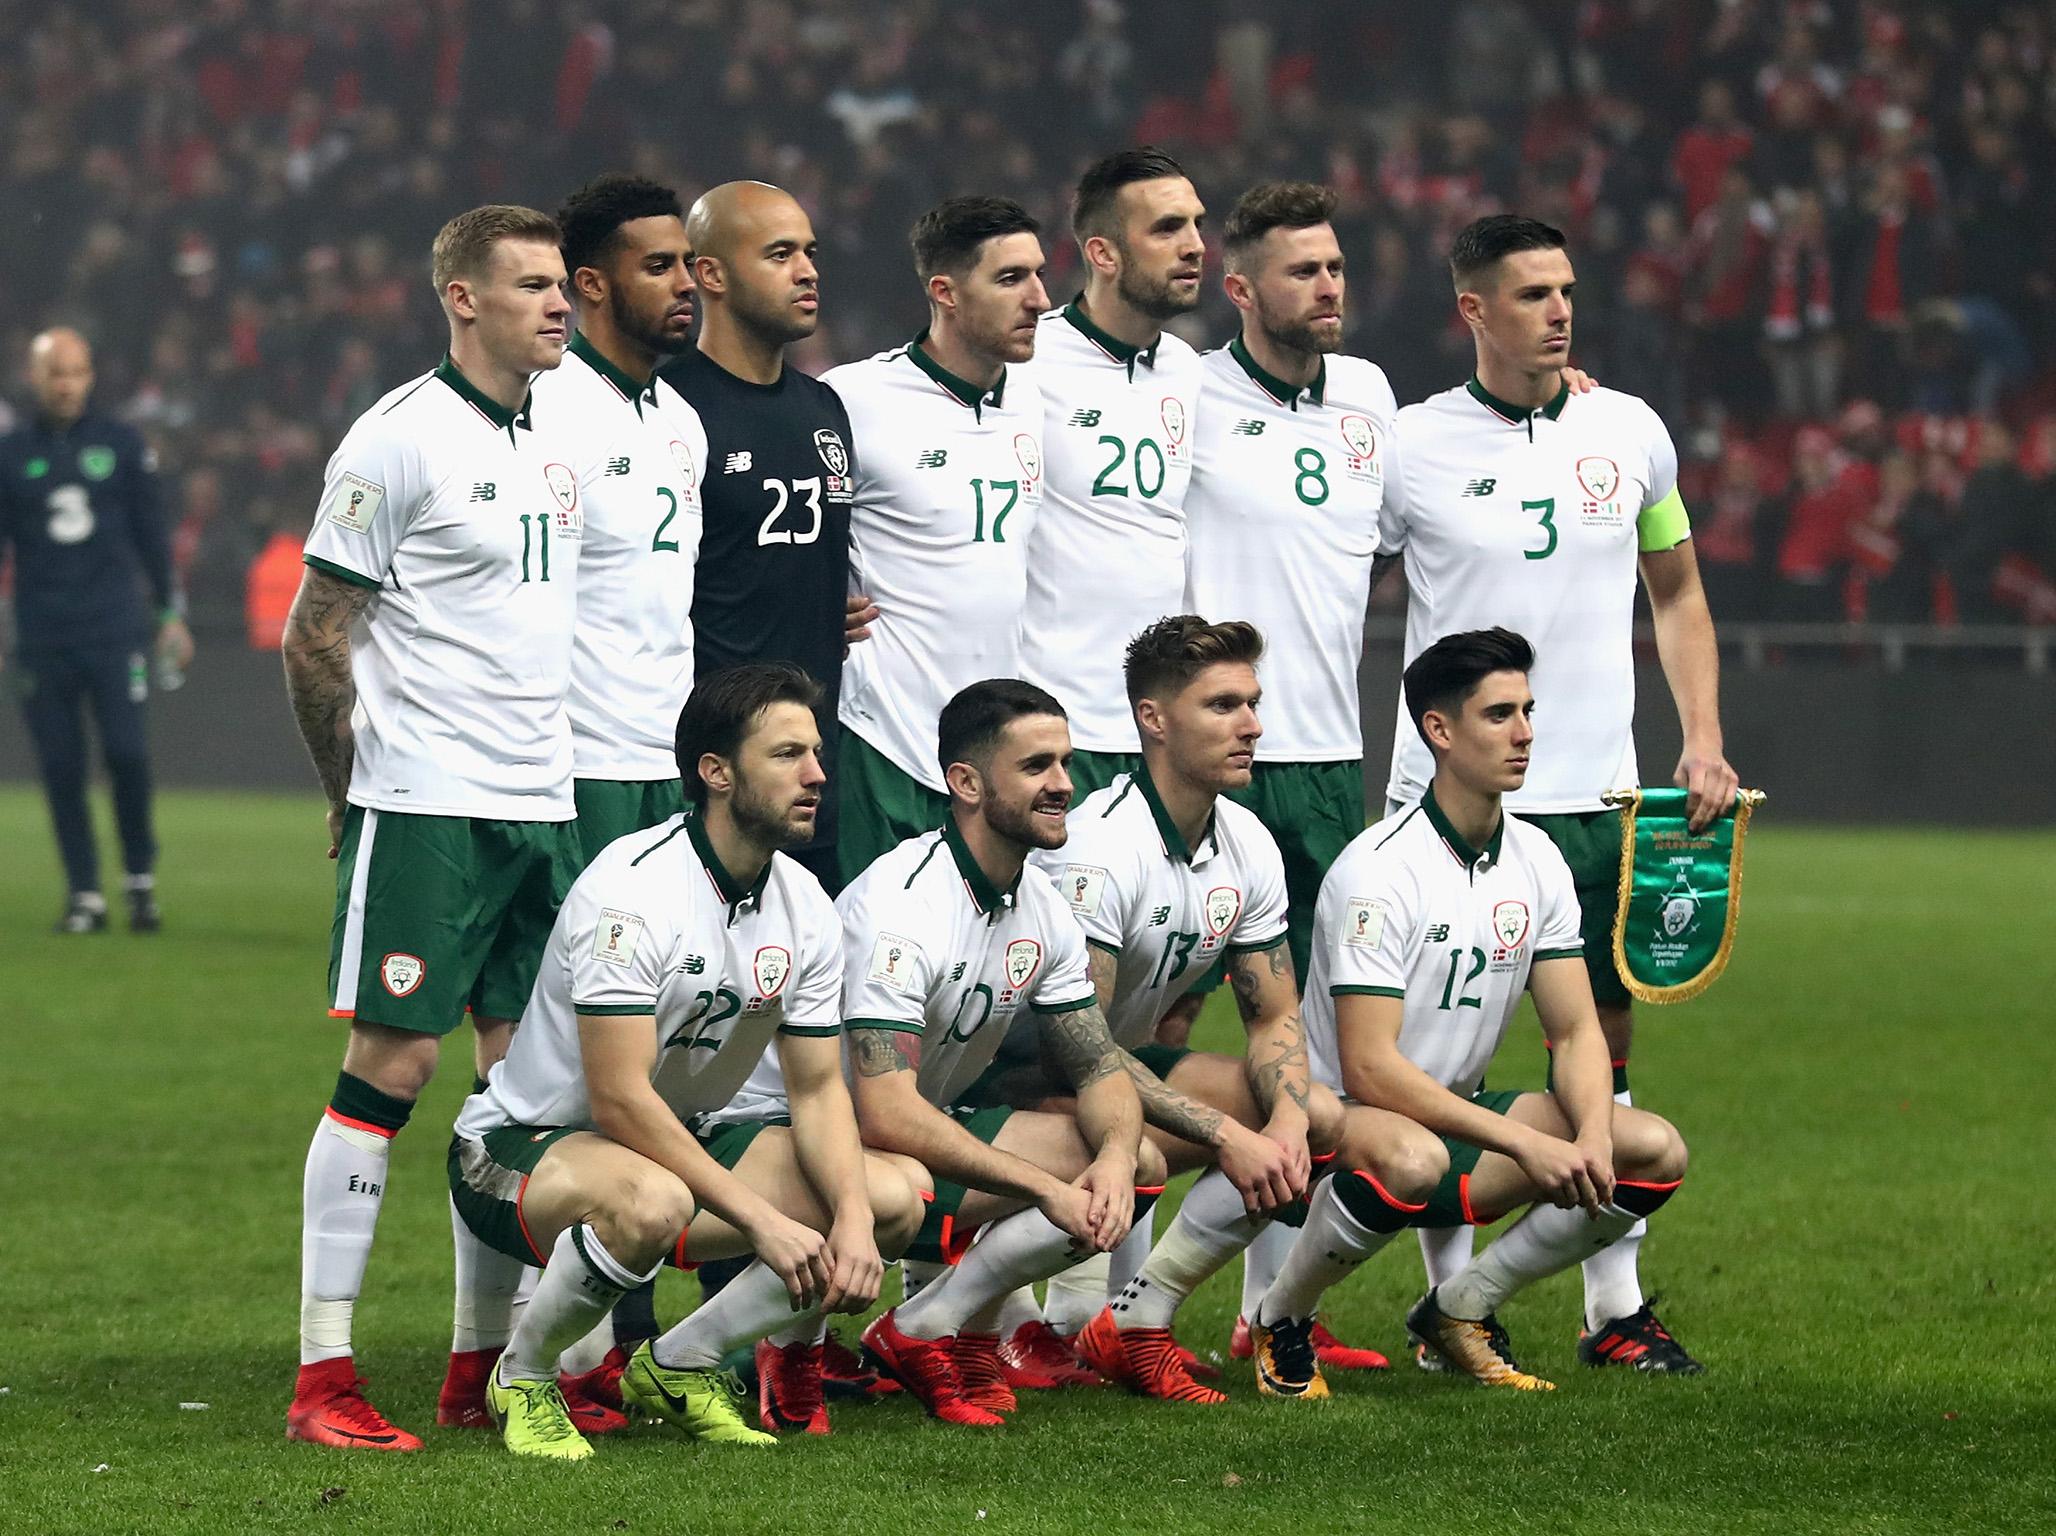 Ireland face Denmark with everything on the line in Dublin